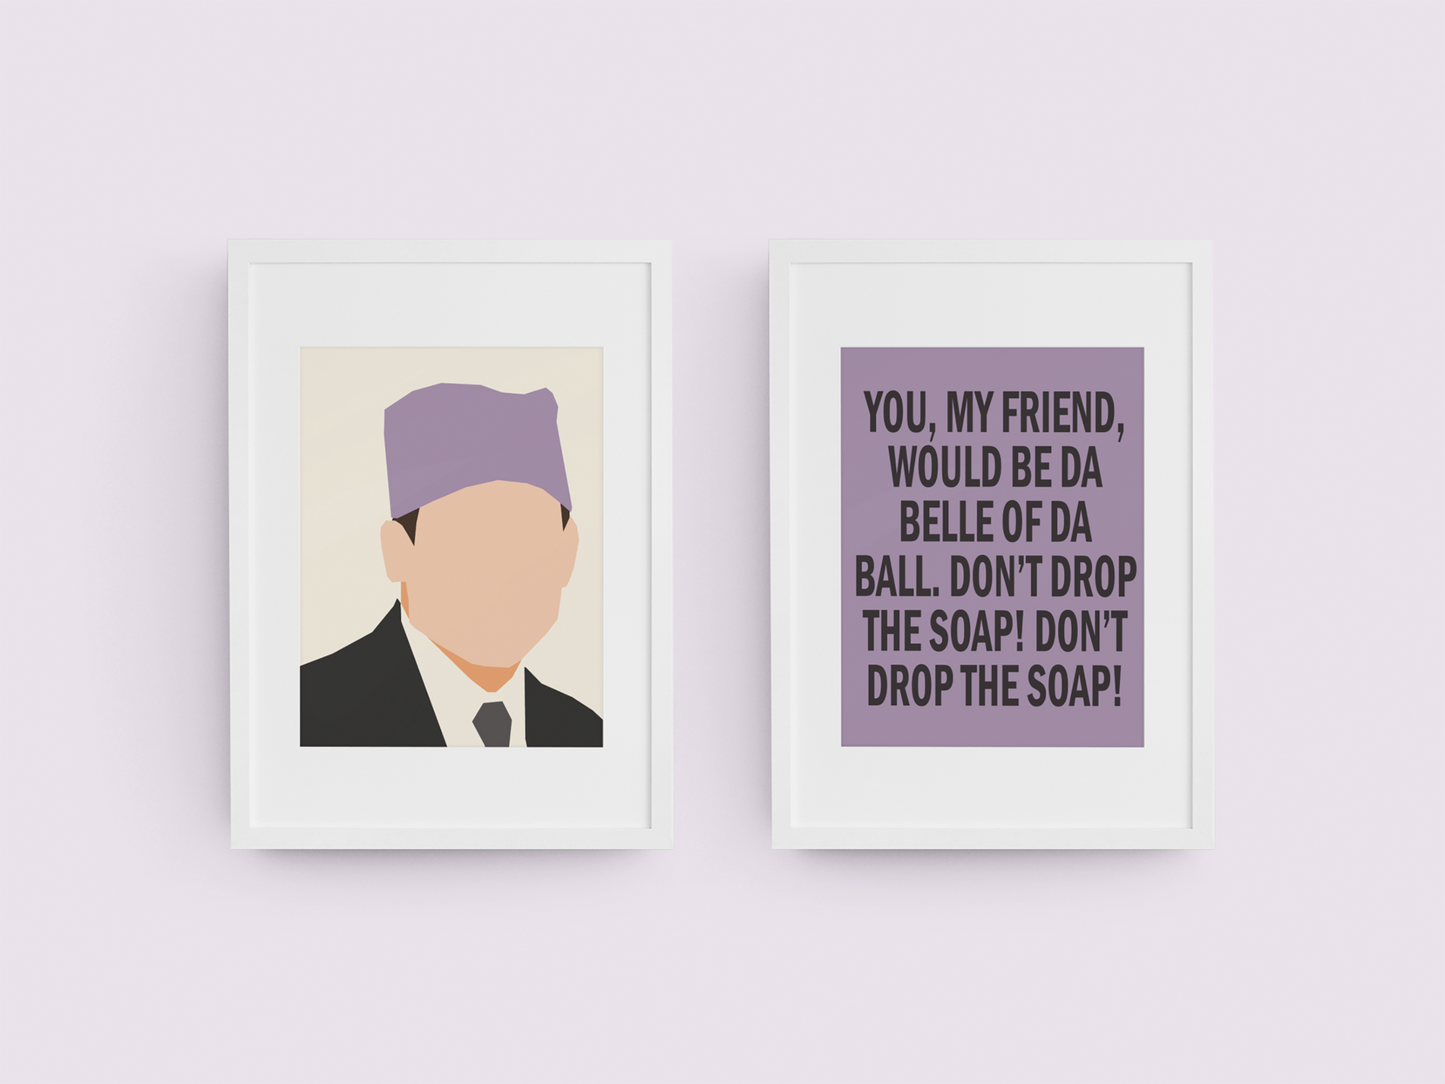 Prison Mike artwork and funny quote. You my friend would be da belle of da ball